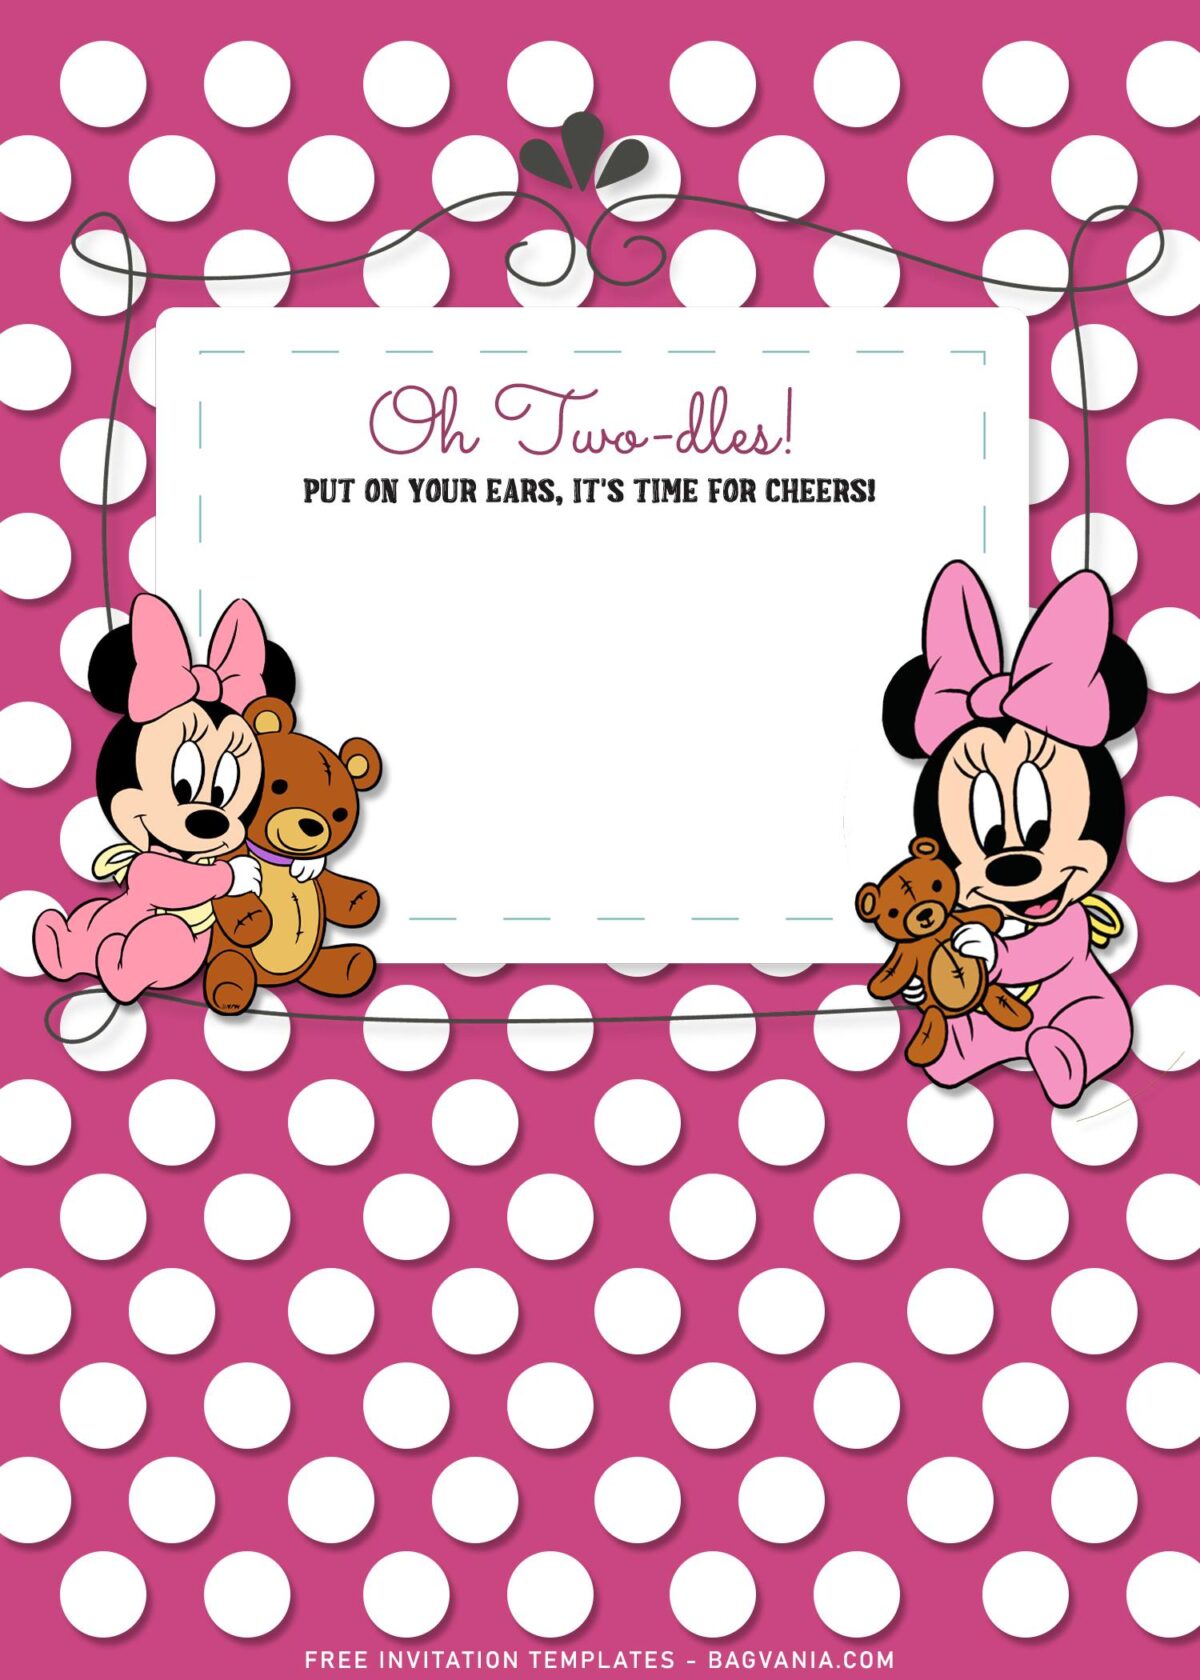 7+ Minnie Mouse Birthday Invitation Templates For Girls Birthday Of All Ages with adorable toddlers Minnie